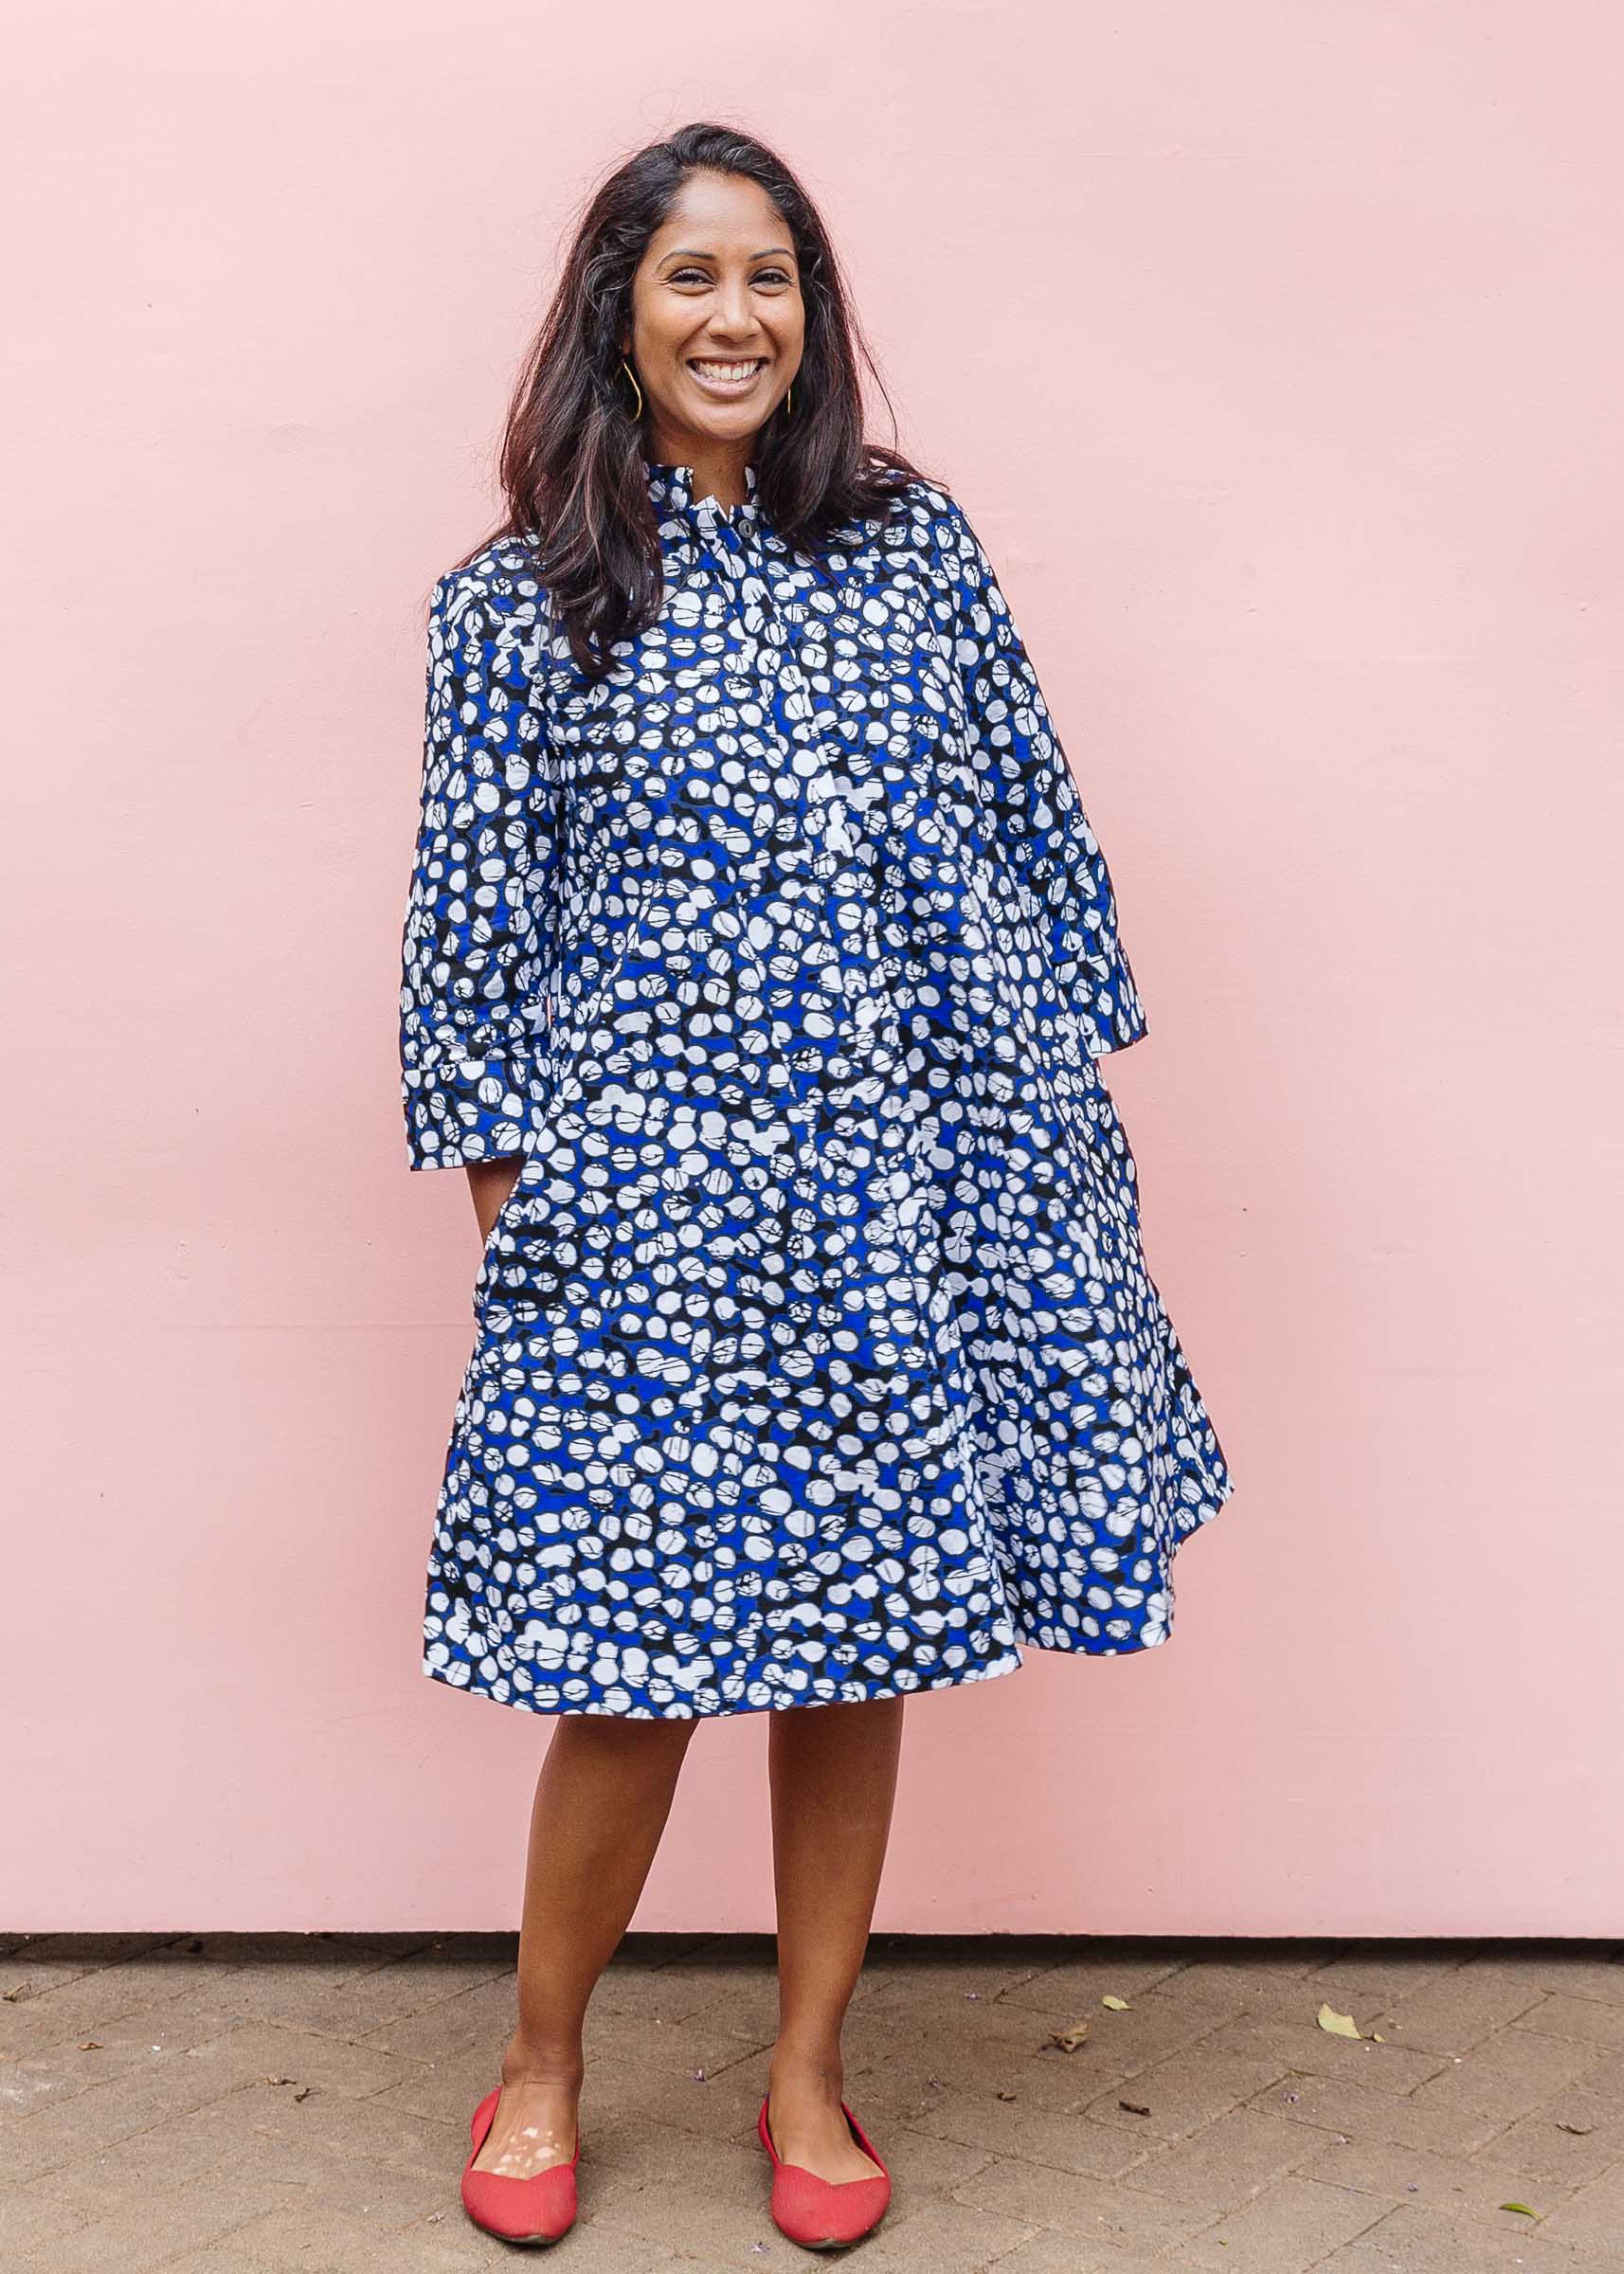 Model wearing blue dress with black and white abstract dots